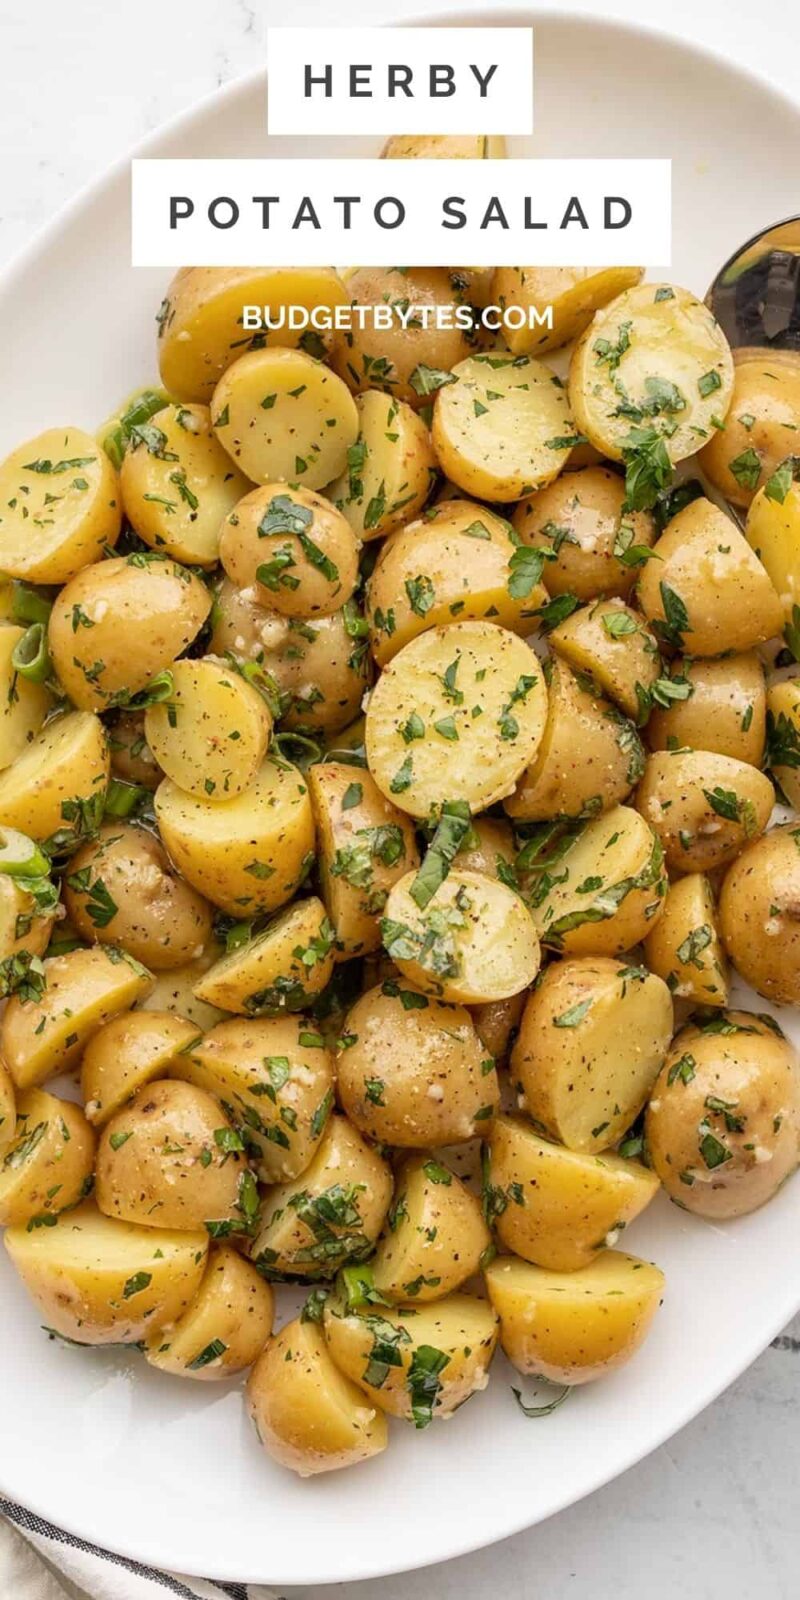 overhead view of a platter full of herby potato salad, title text at the top.